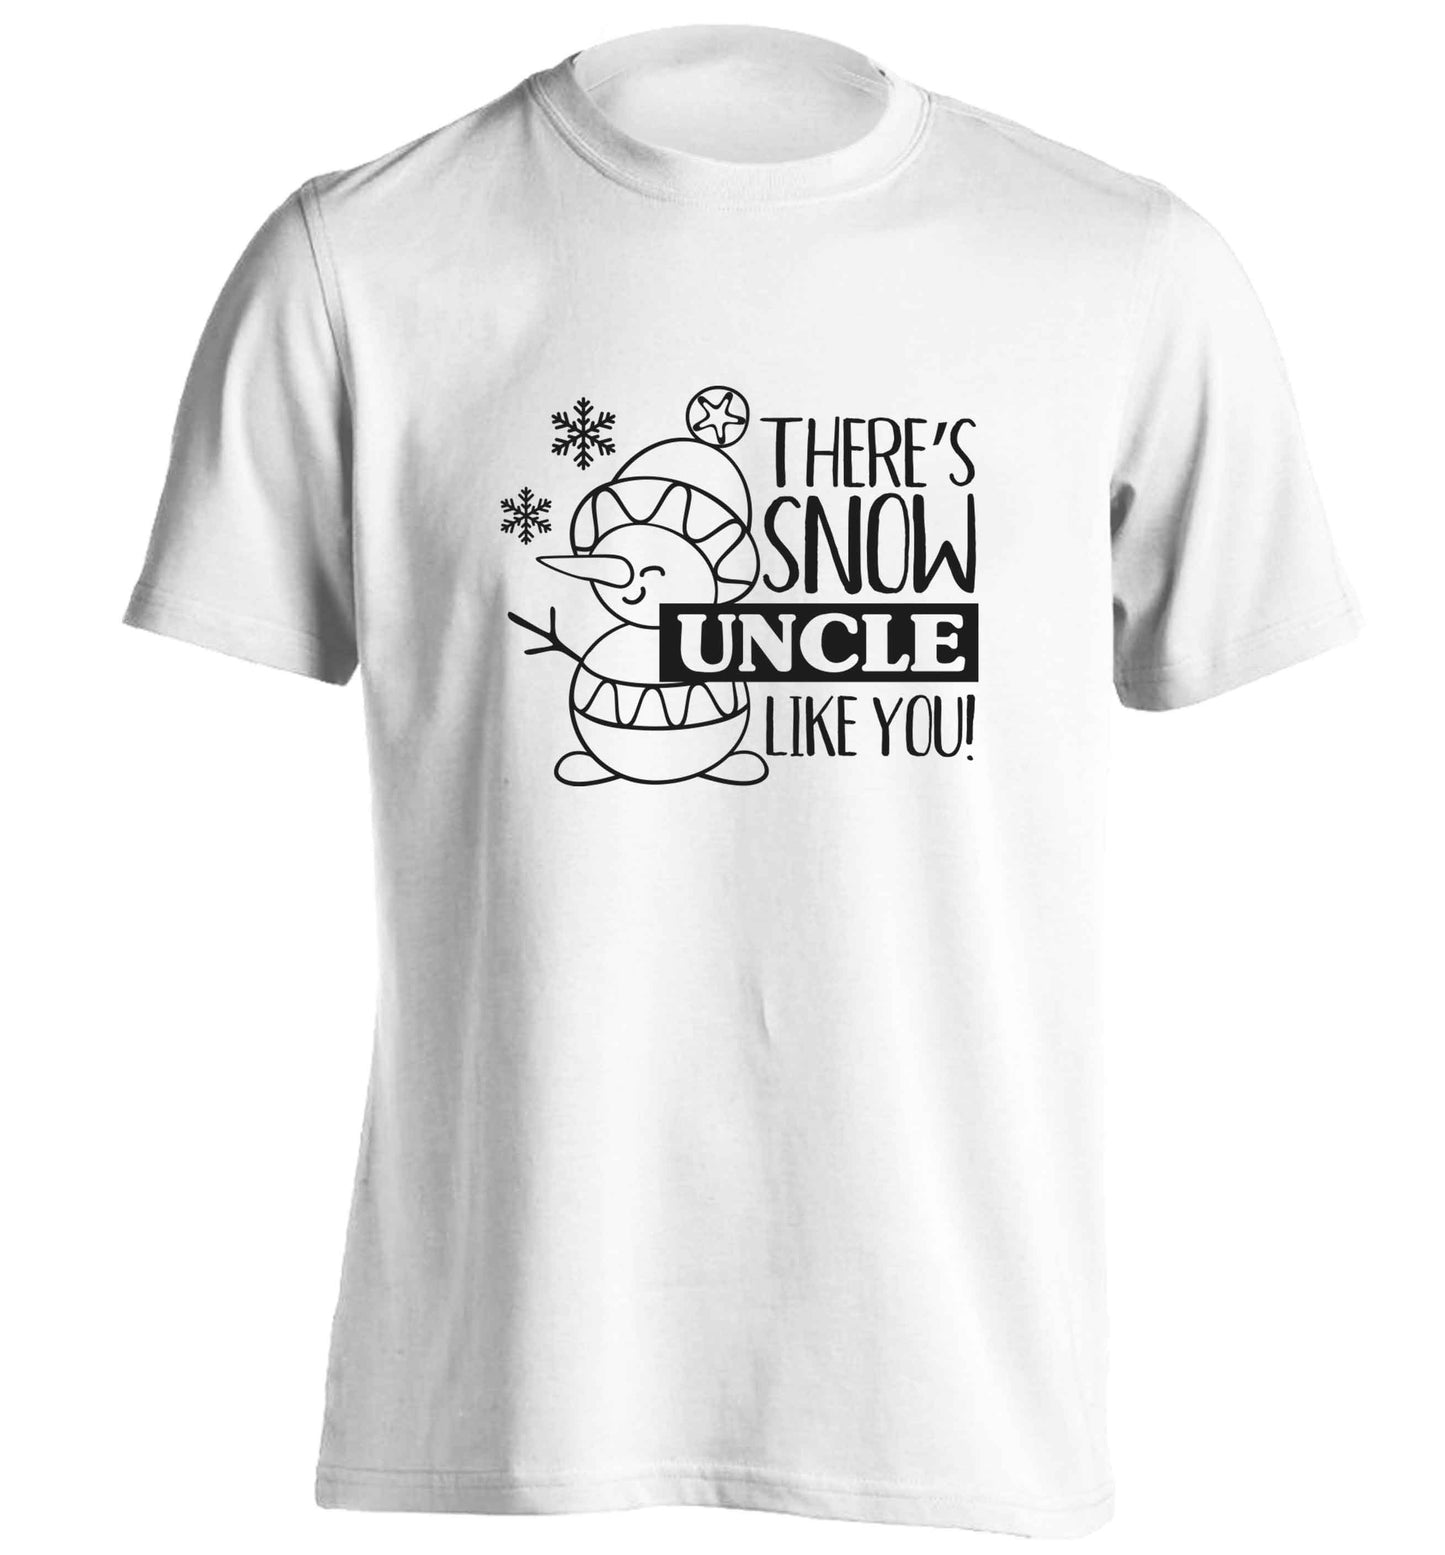 There's snow uncle like you adults unisex white Tshirt 2XL